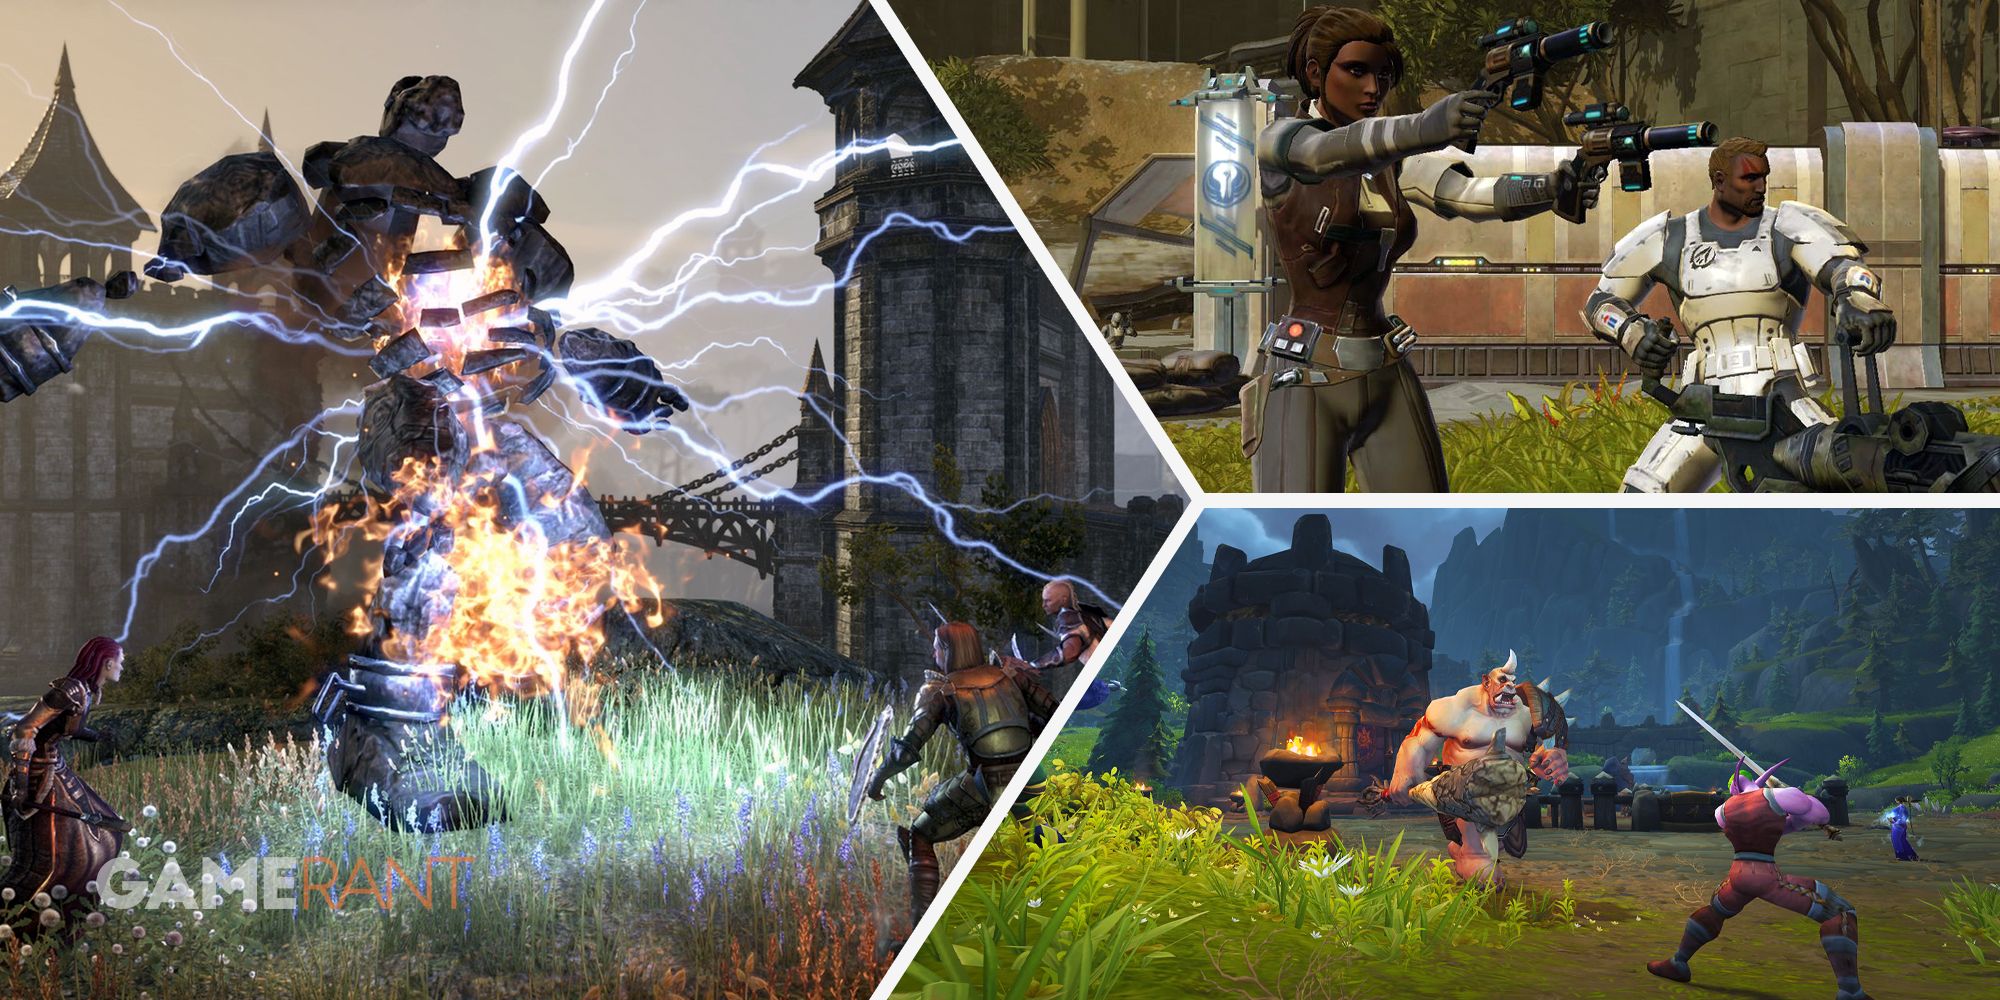 The Elder Scrolls Online players battling a lightning storm atronach on left, Star Wars: The Old Republic players with weapons on top right, World of Warcraft player battling an enemy on bottom right